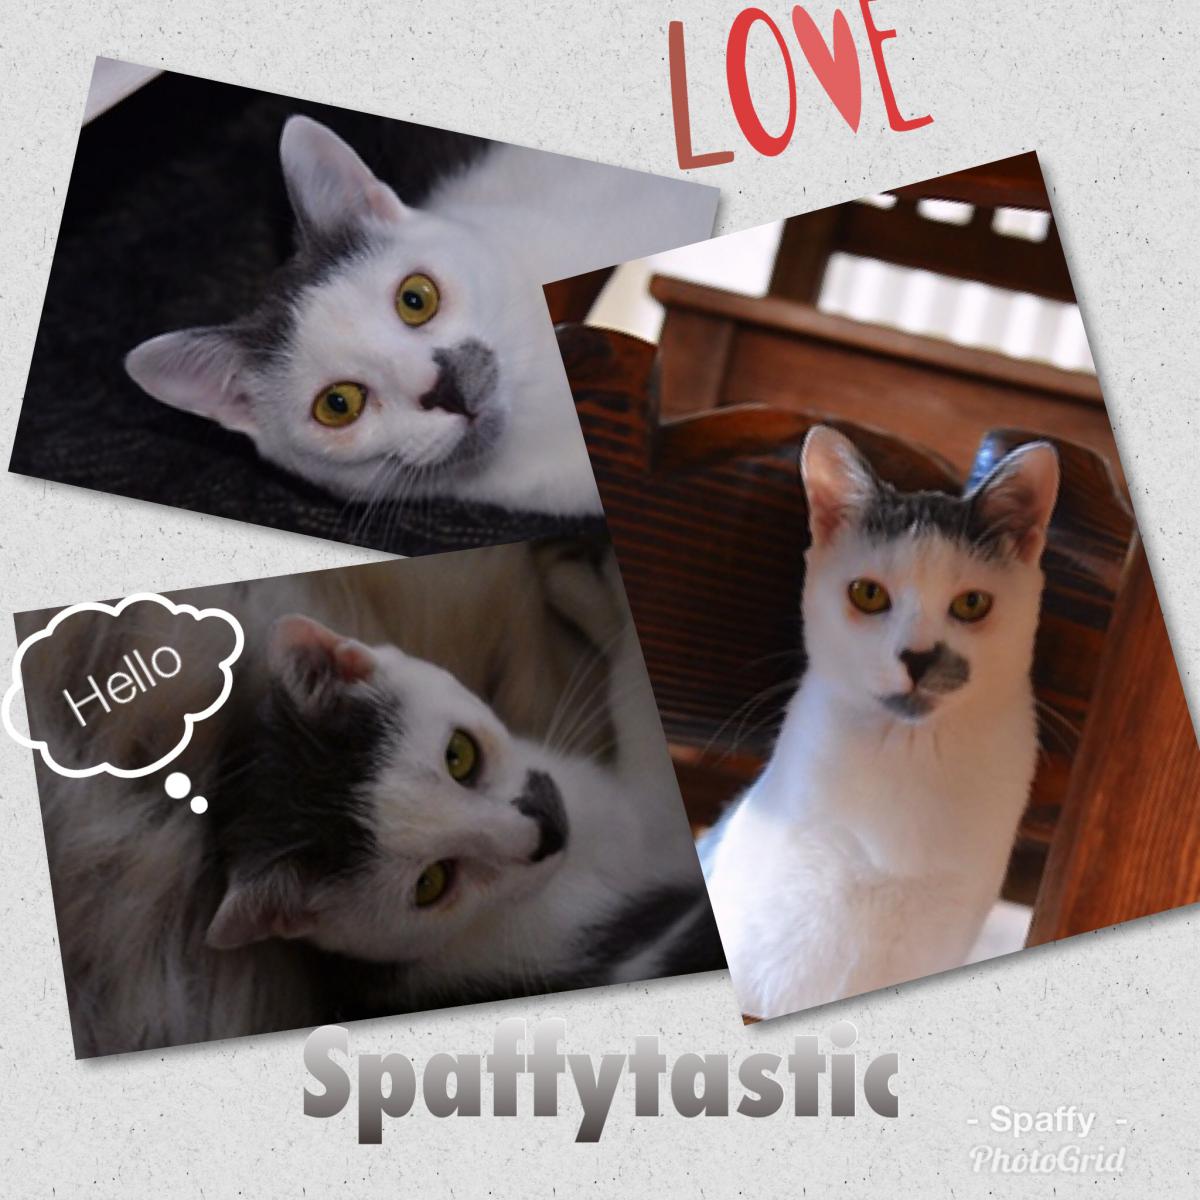 Image of Twitter (Spaffy), Lost Cat